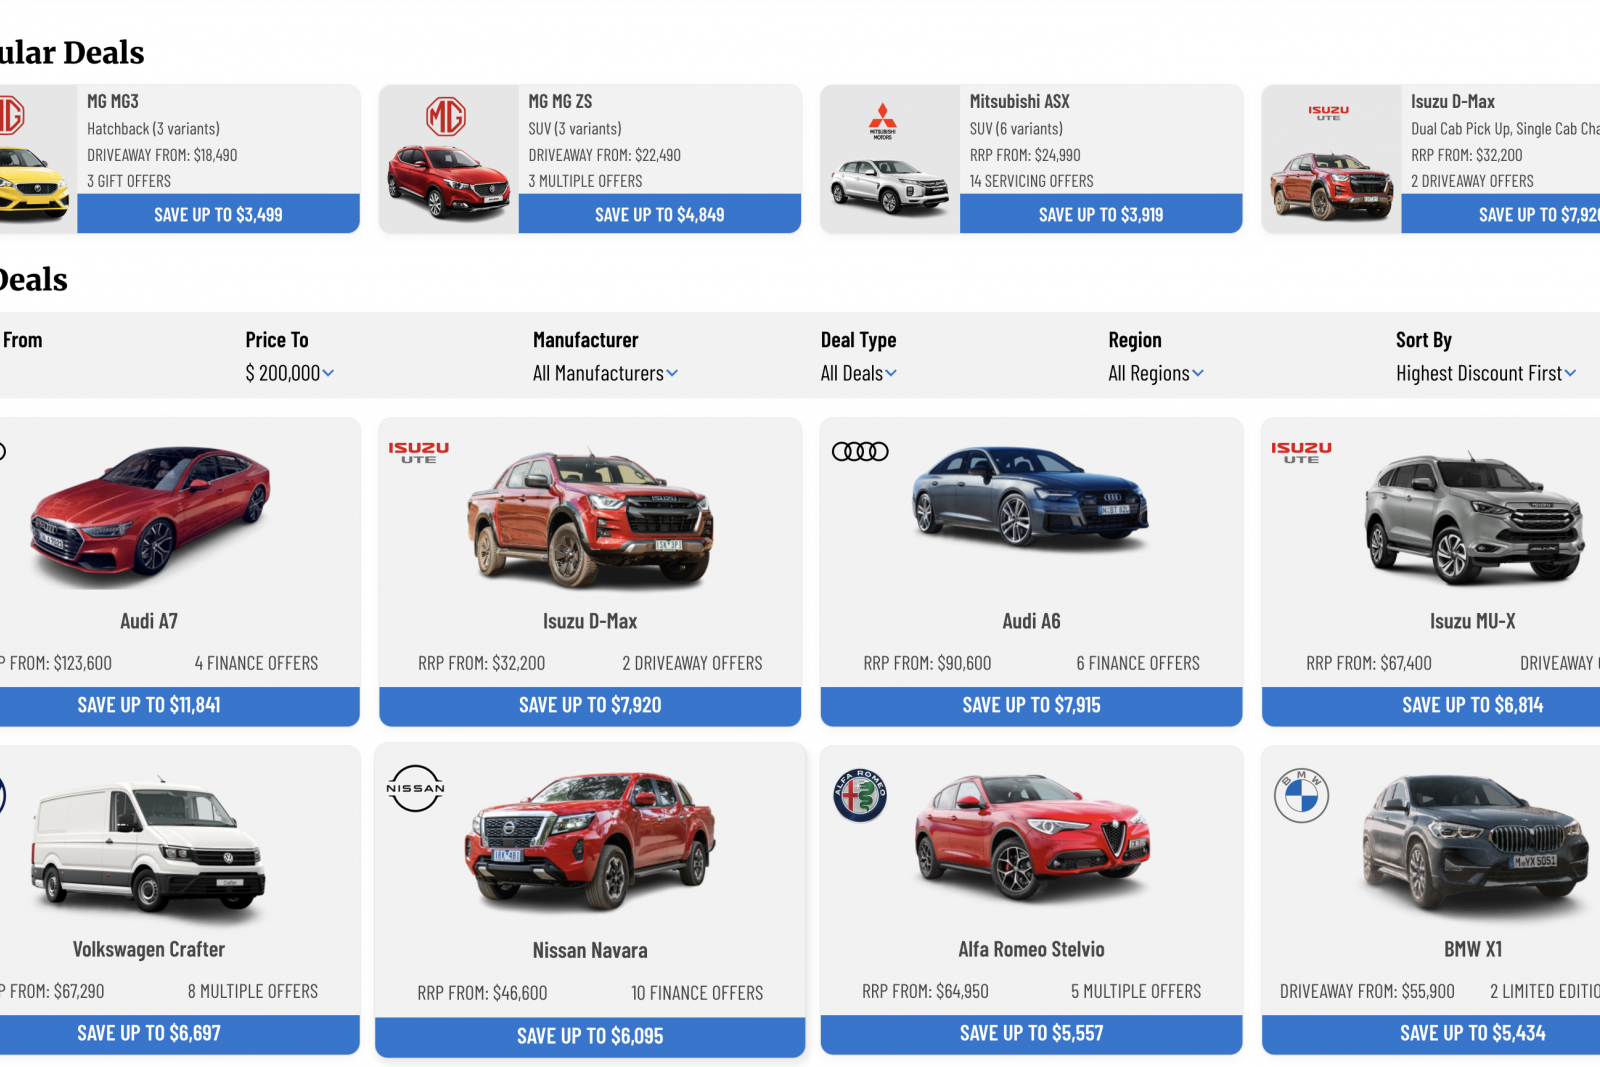 every-new-car-deal-offer-and-incentive-now-in-one-place-carexpert